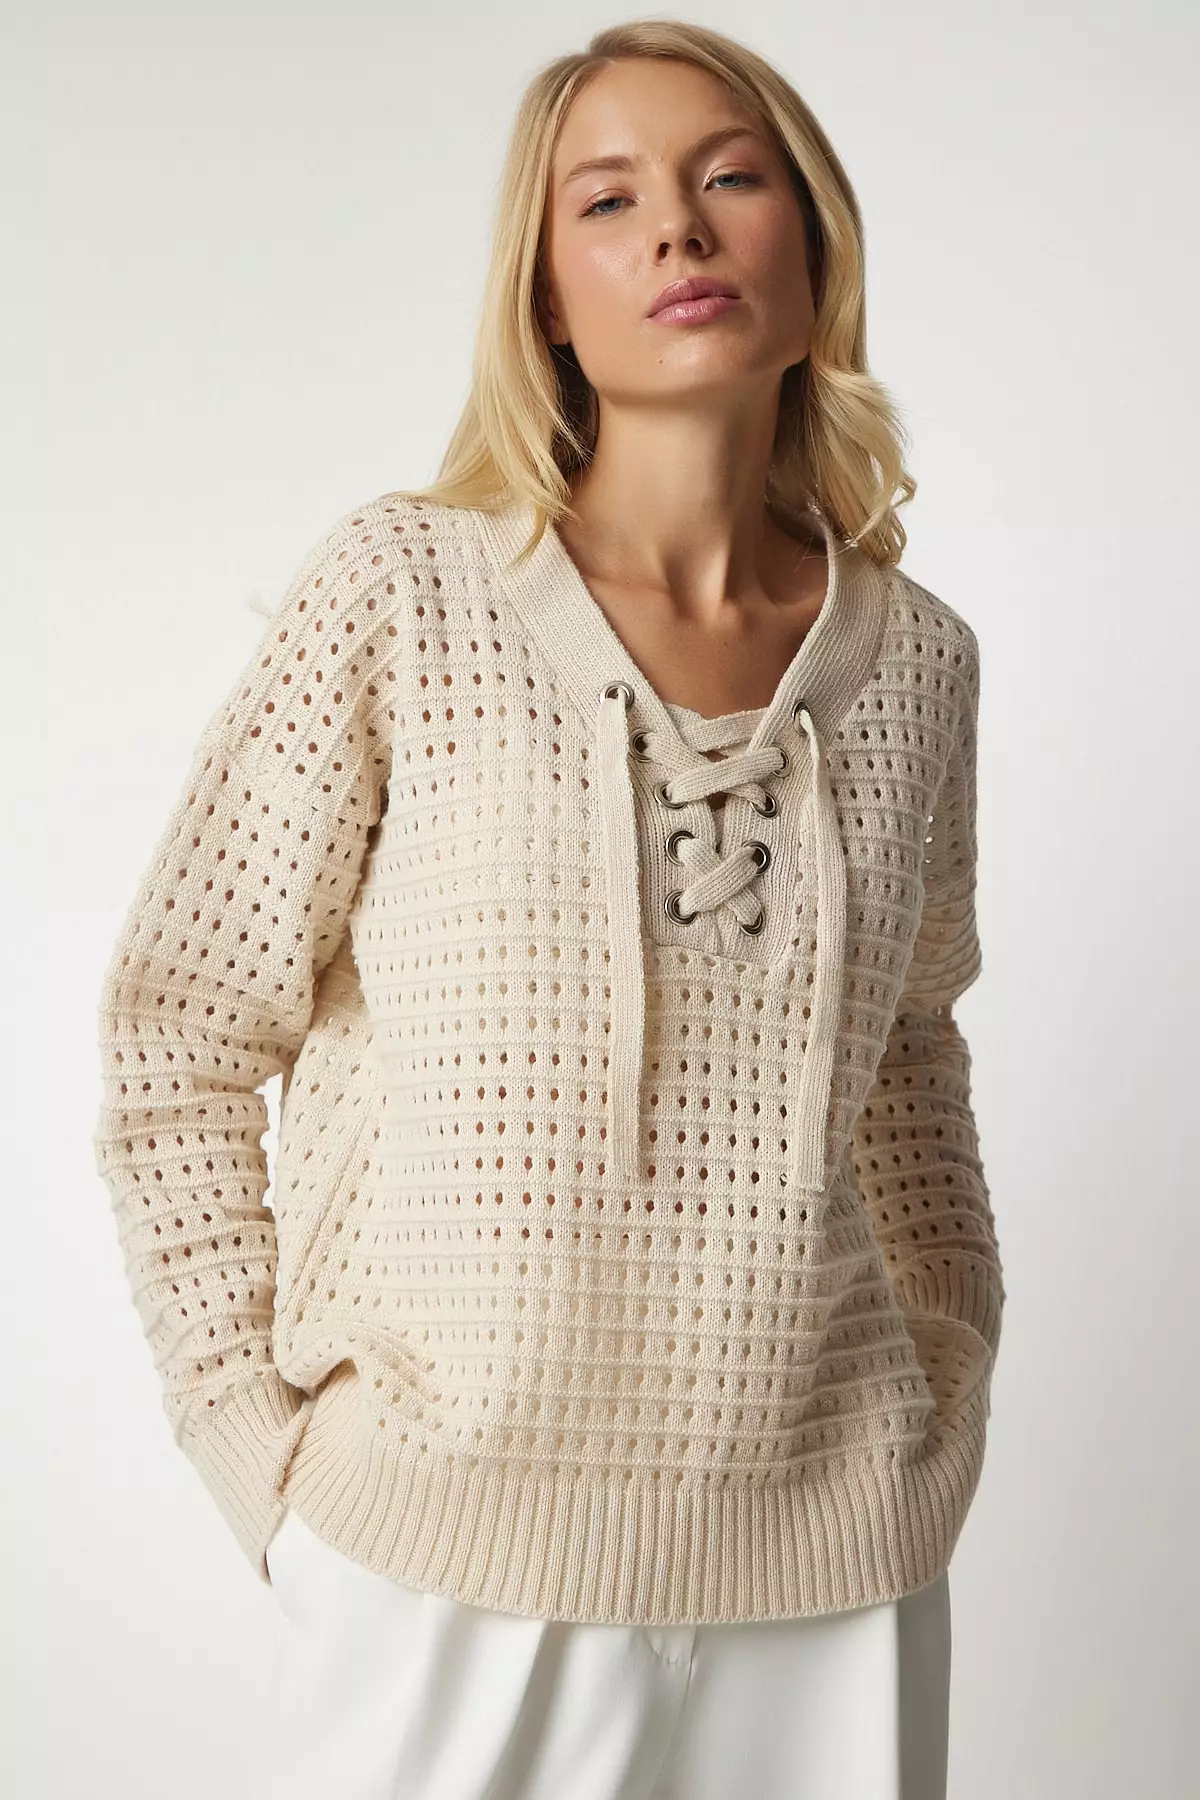 Buy Happiness Istanbul Cream Collar Lace-Up, Openwork Knitwear Sweater ...